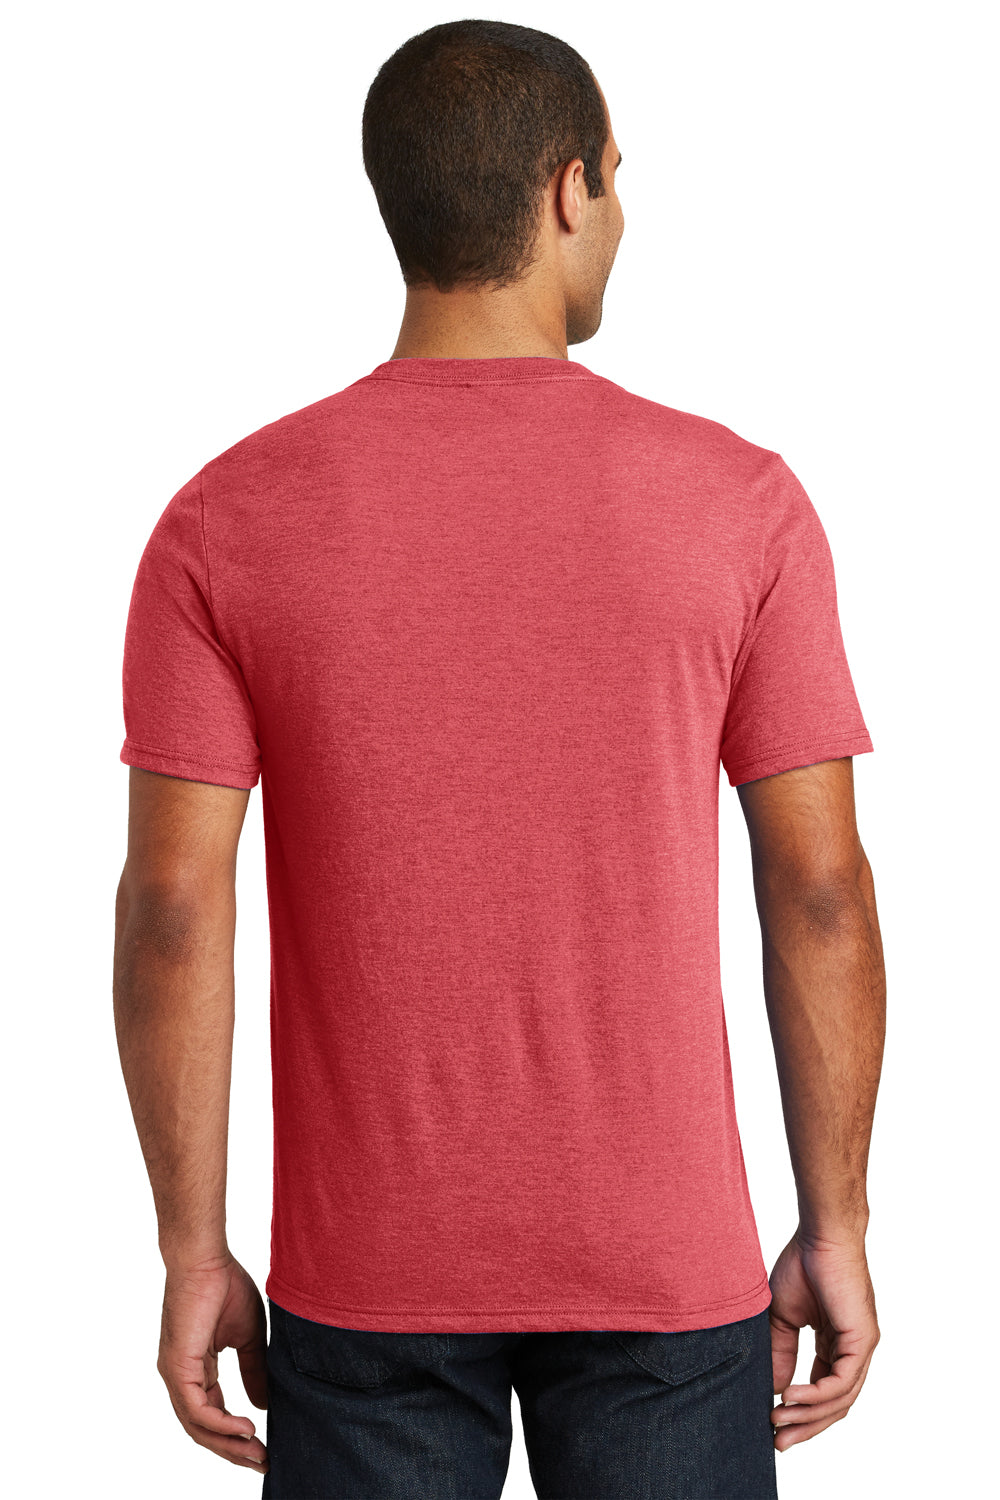 District DT1350 Mens Perfect Tri Short Sleeve V-Neck T-Shirt Red Frost Back